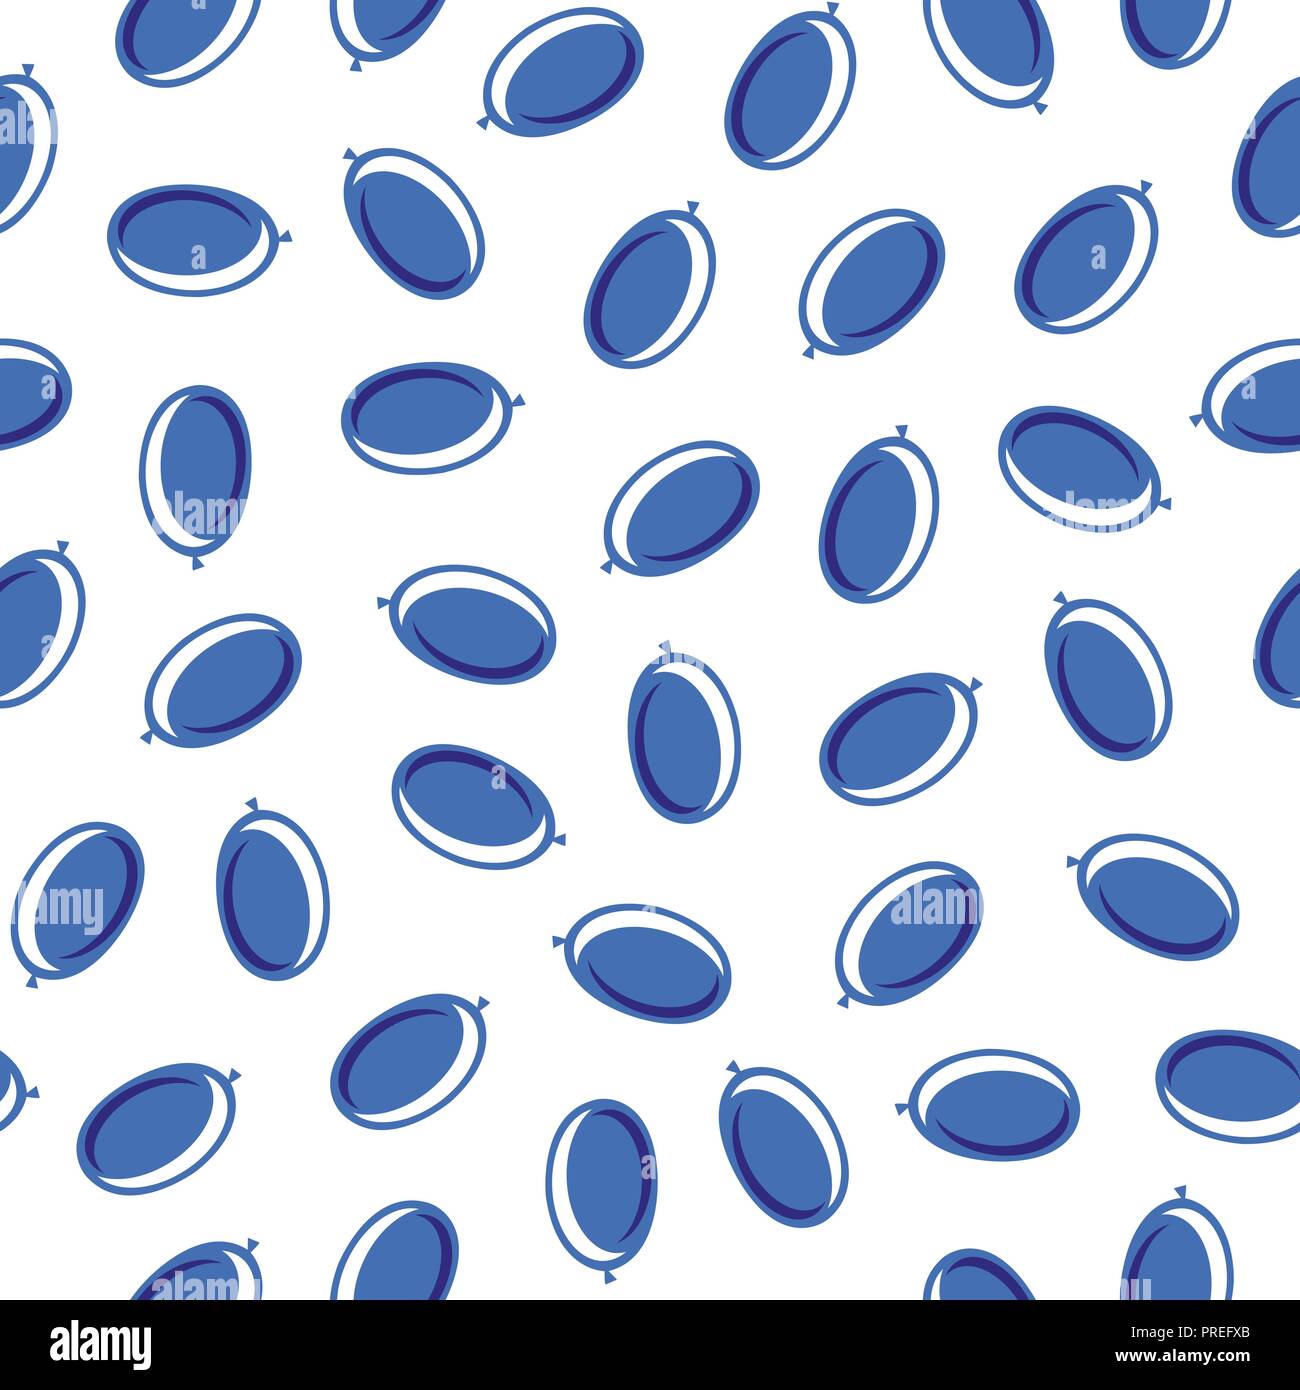 Blue white air balloons seamless pattern Stock Vector